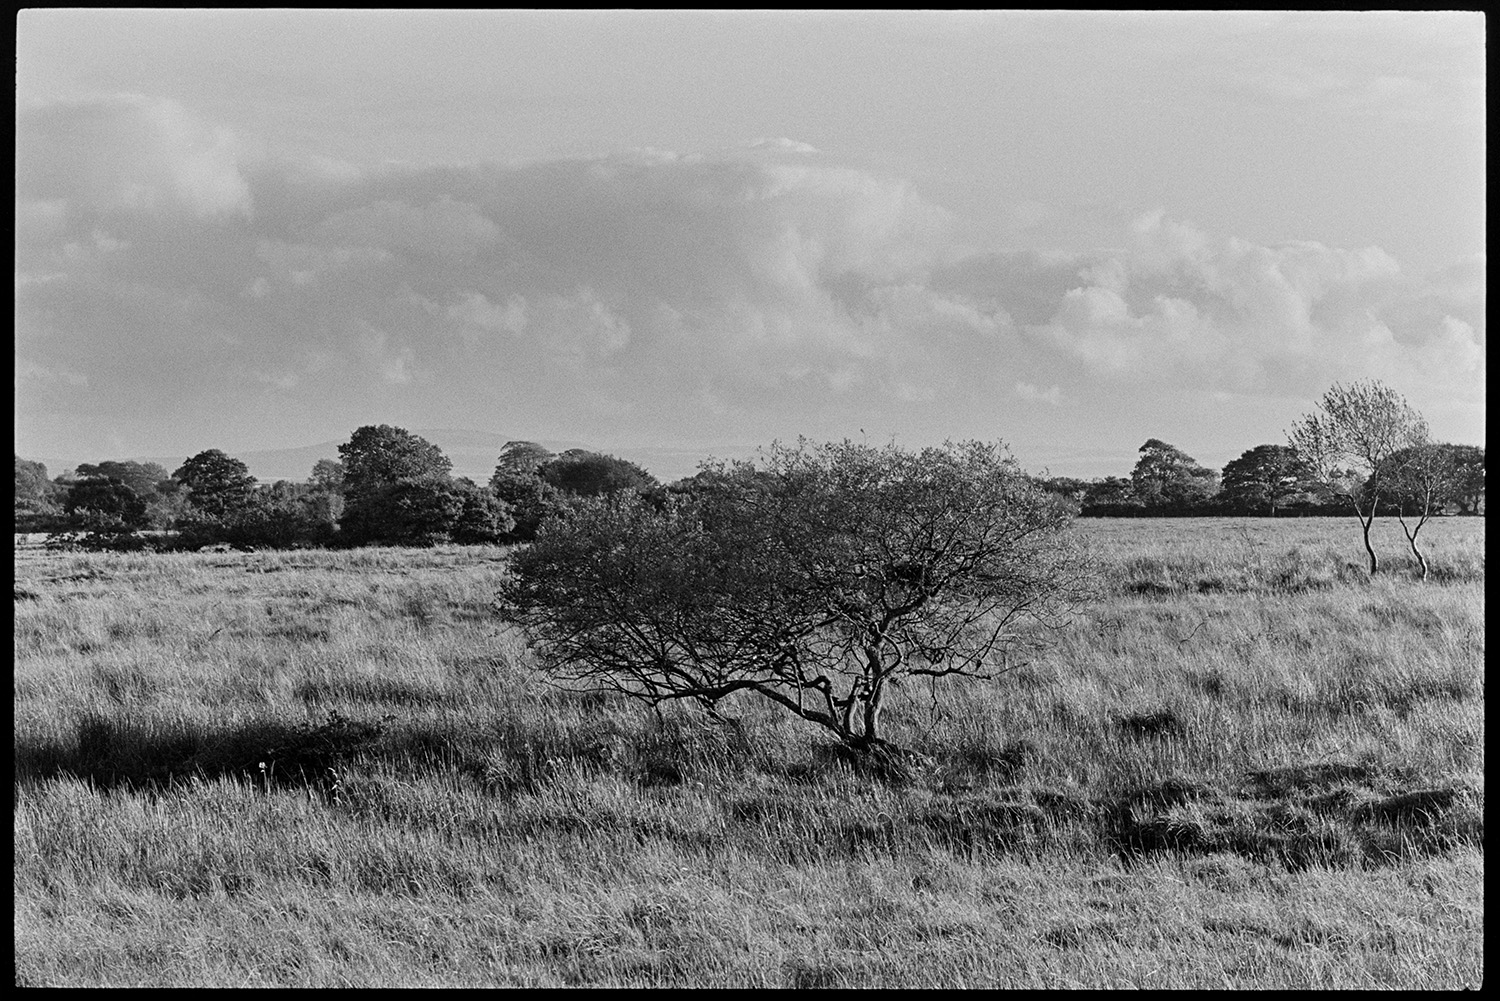 Landscape with sheep and distant moor. 
[A weather beaten tree on Hollocombe Moor. More trees can be seen in the background under a sky with clouds.]